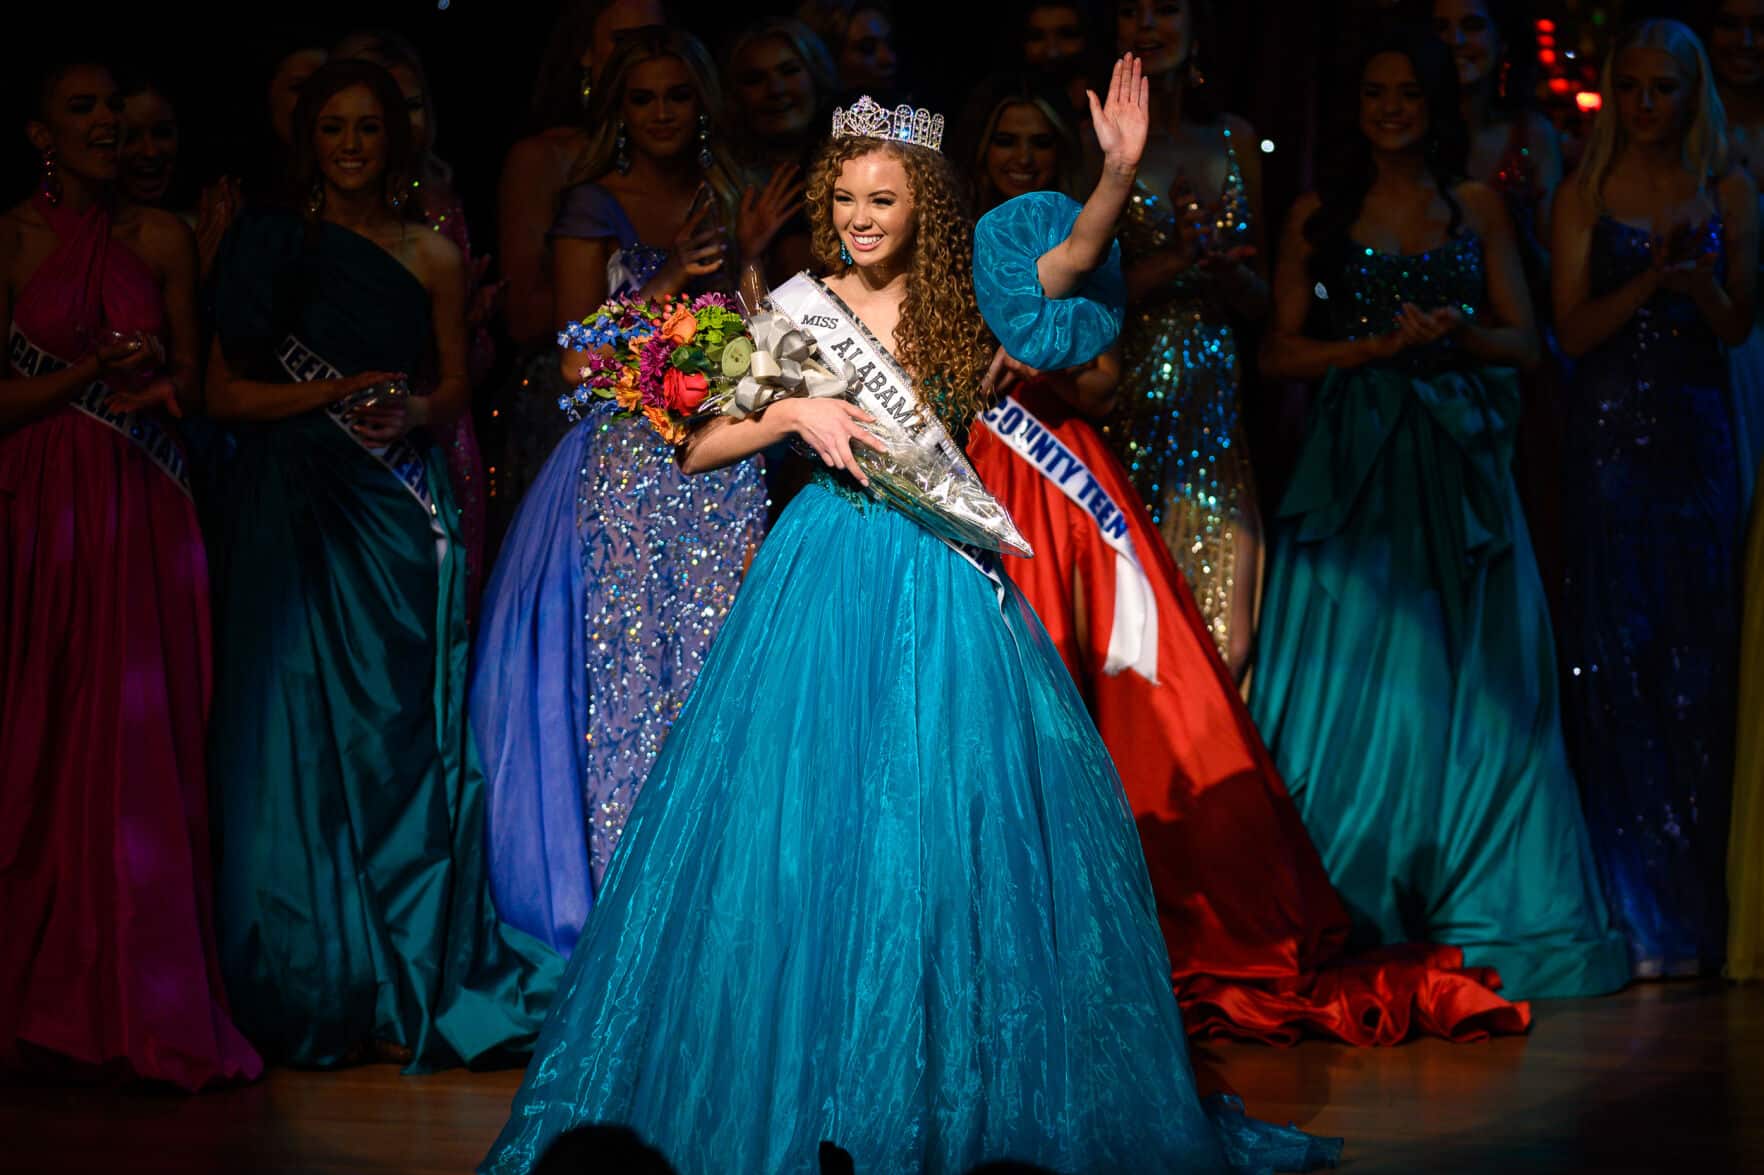 Kensey Collins takes her first walk as Miss Alabama Teen USA 2023